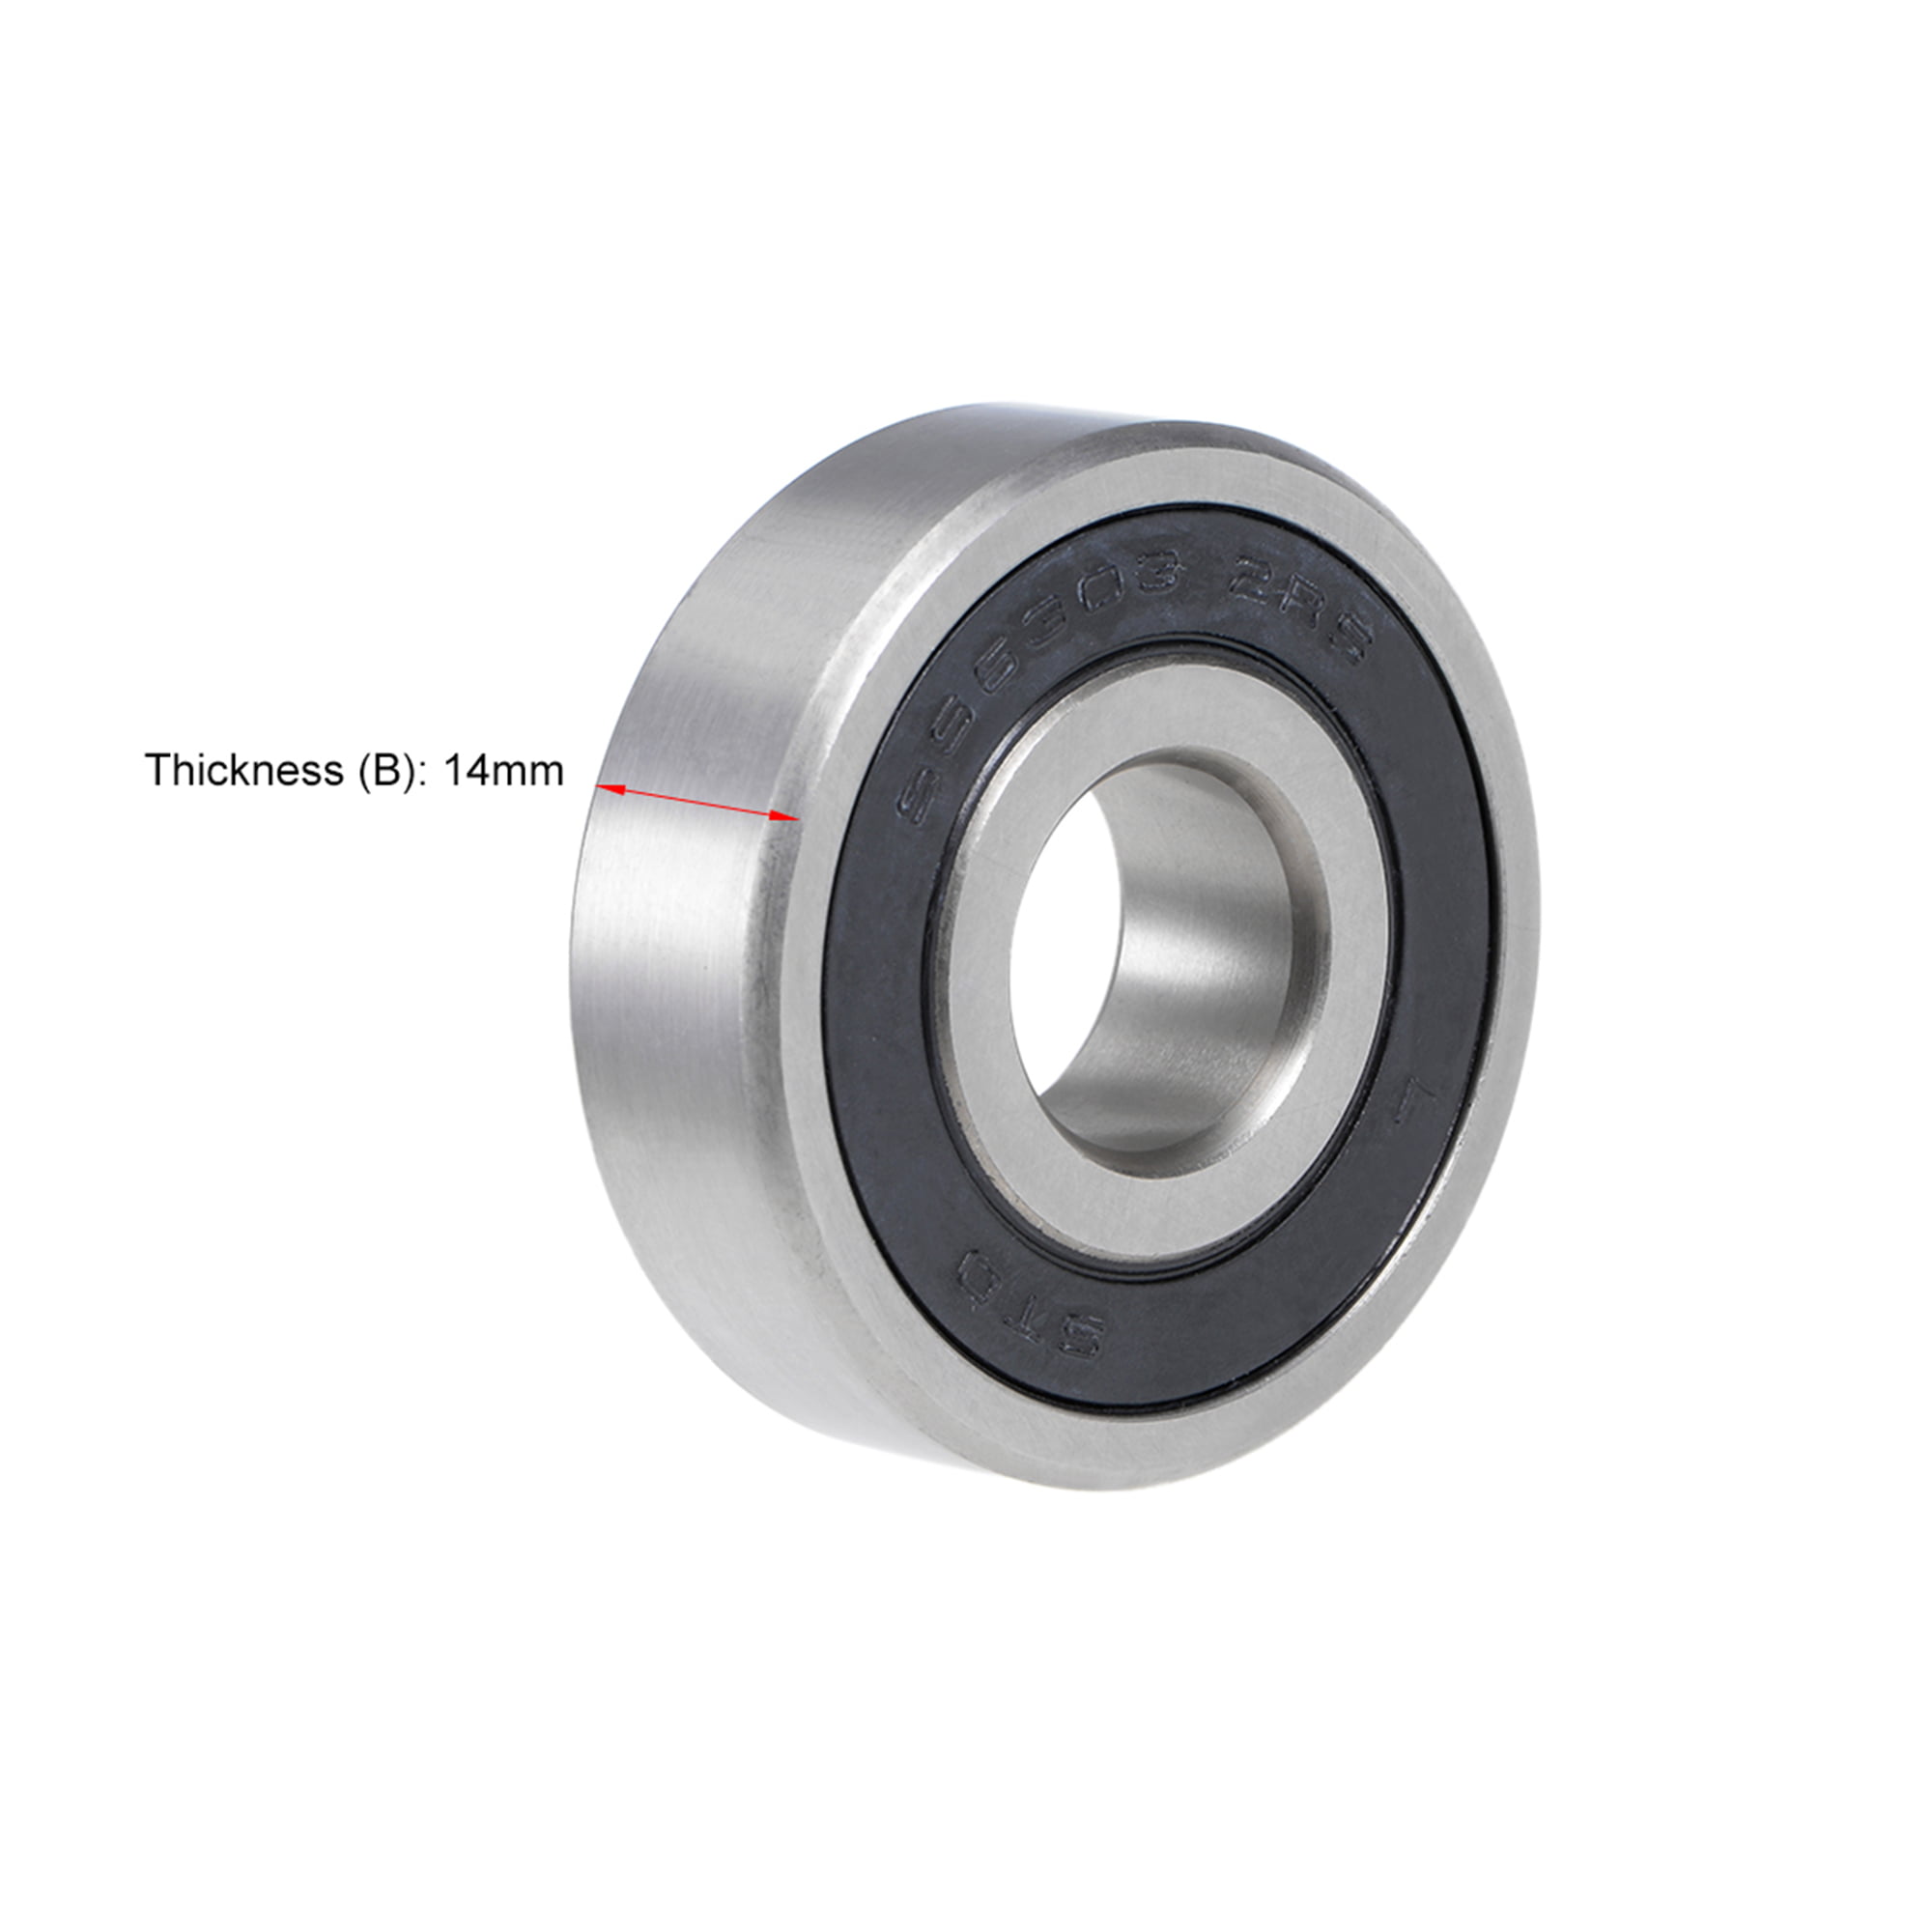 S6204-2RS Bearing 20mm x 47mm Stainless Steel 6204RS 